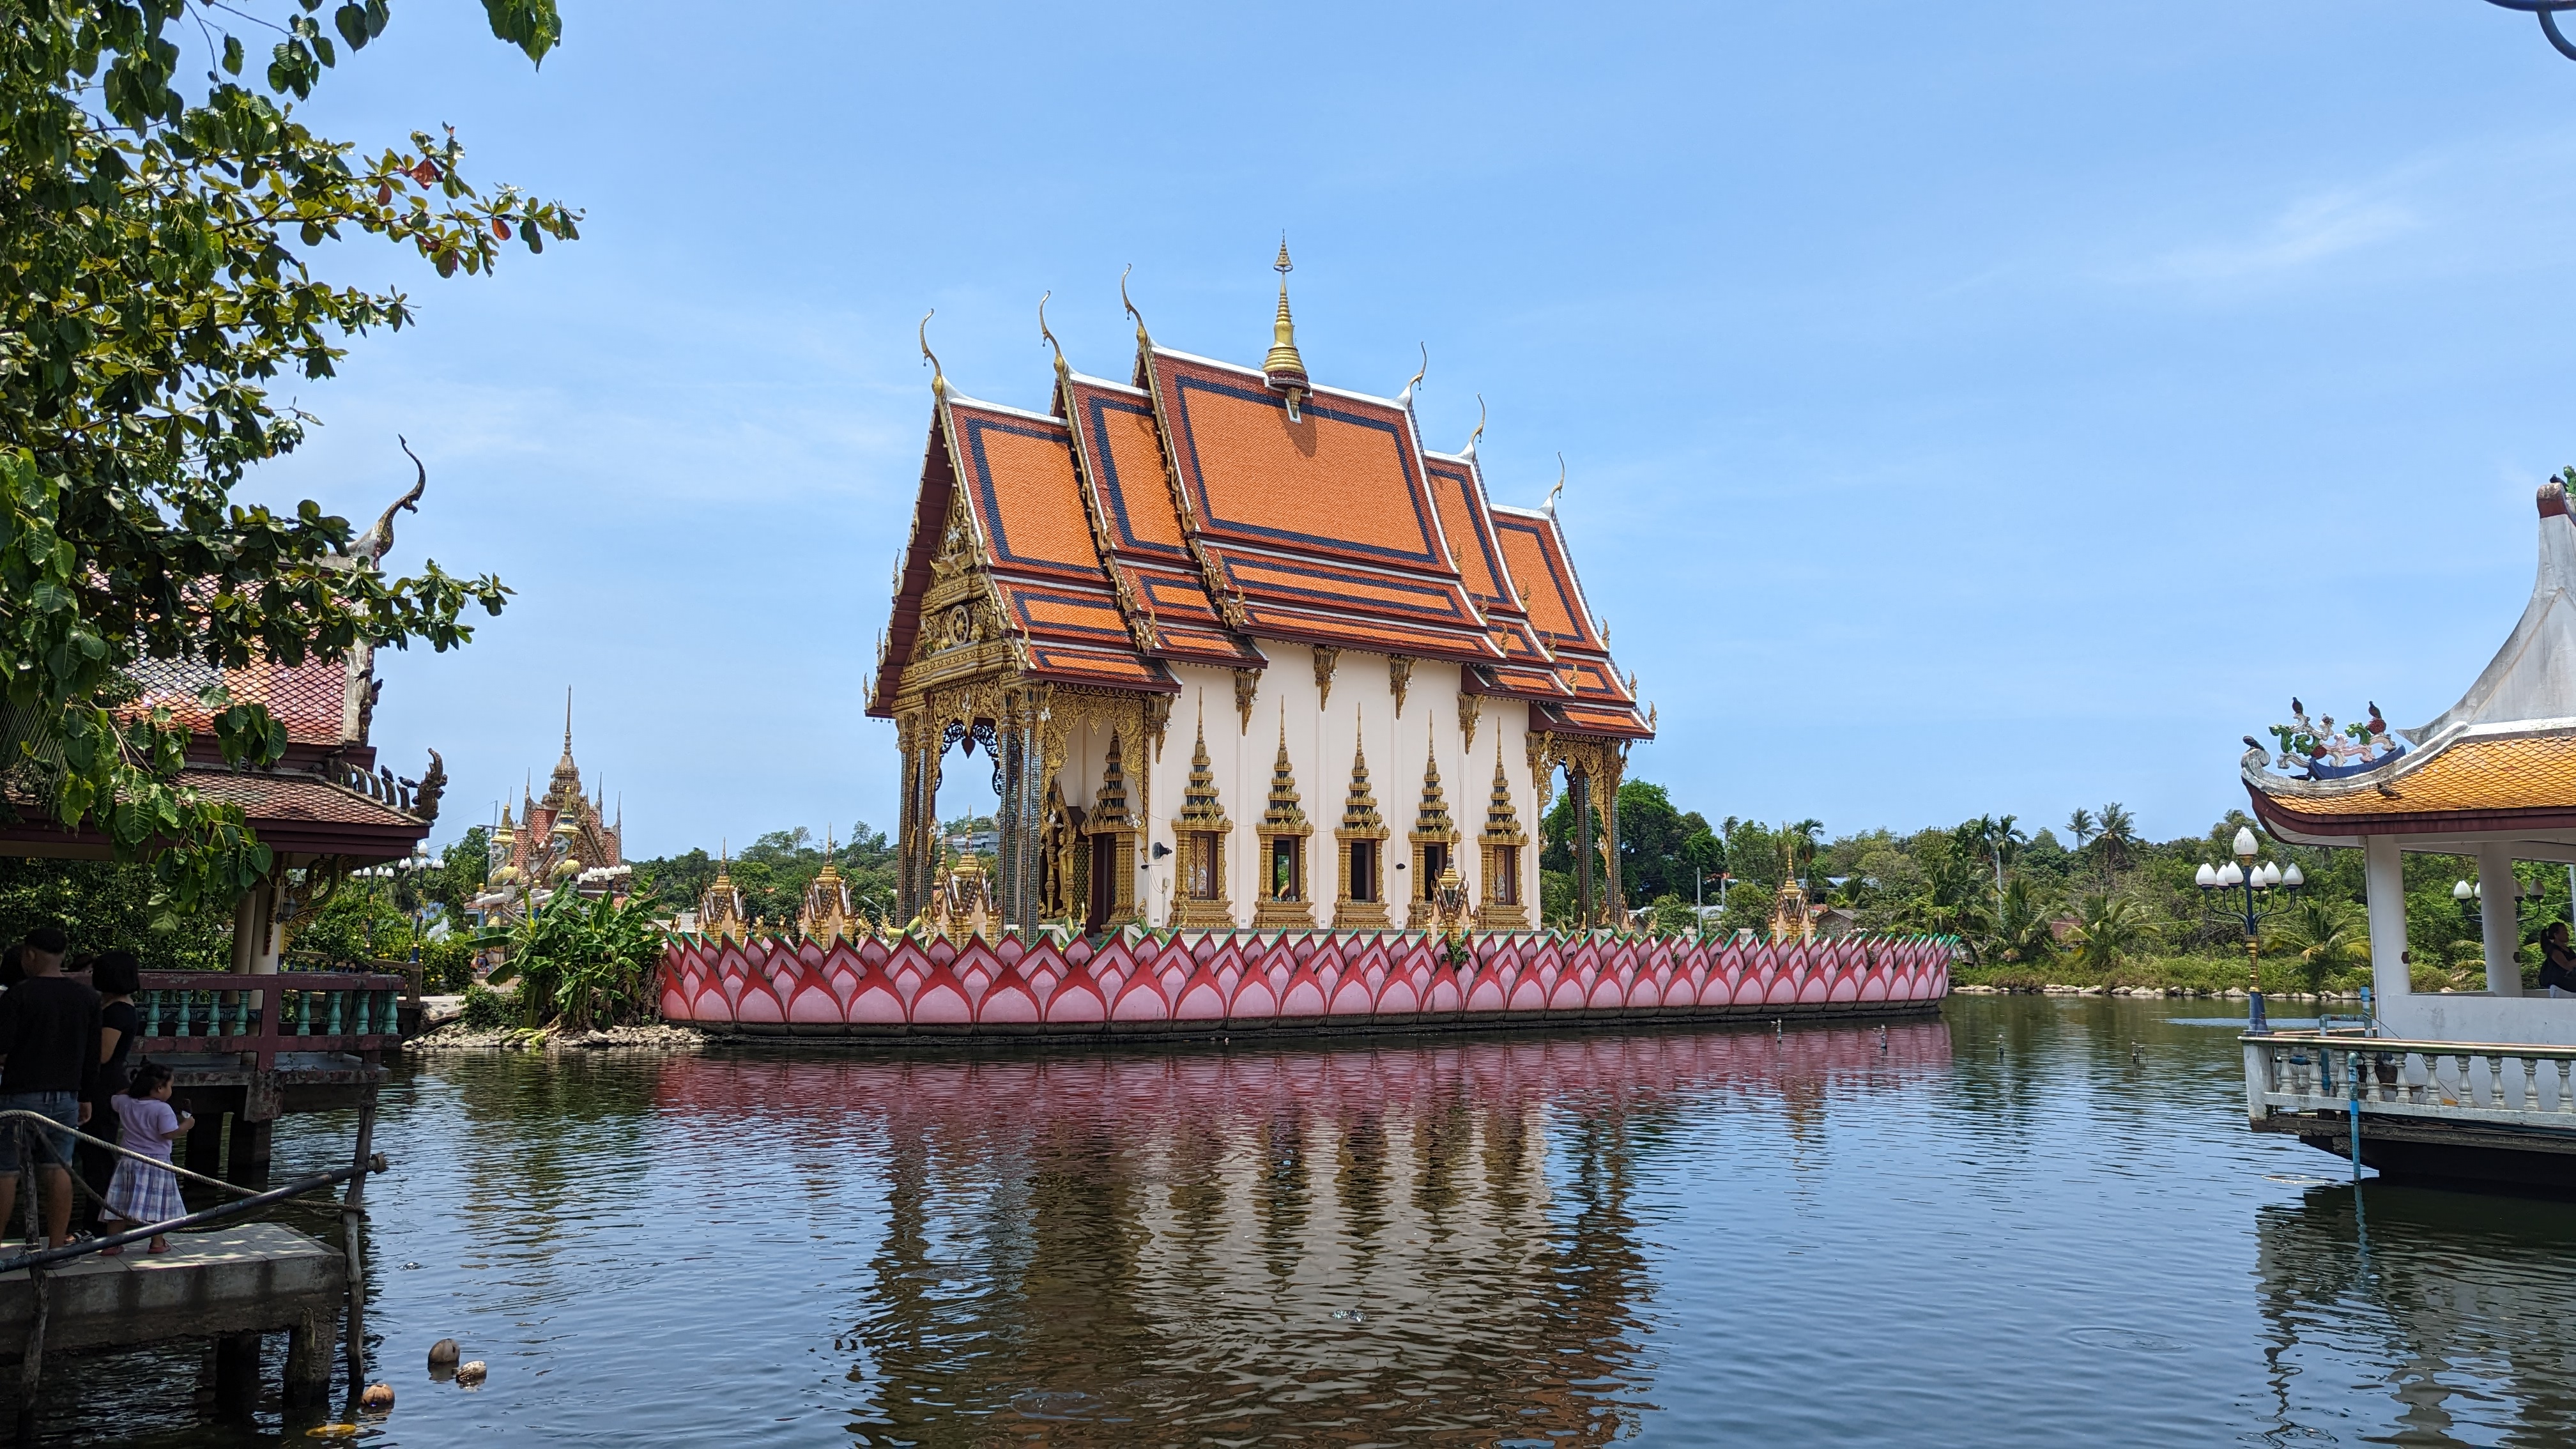 A serene view of Wat Plai Laem, Koh Samui, surrounded by lush greenery and tranquil lotus ponds